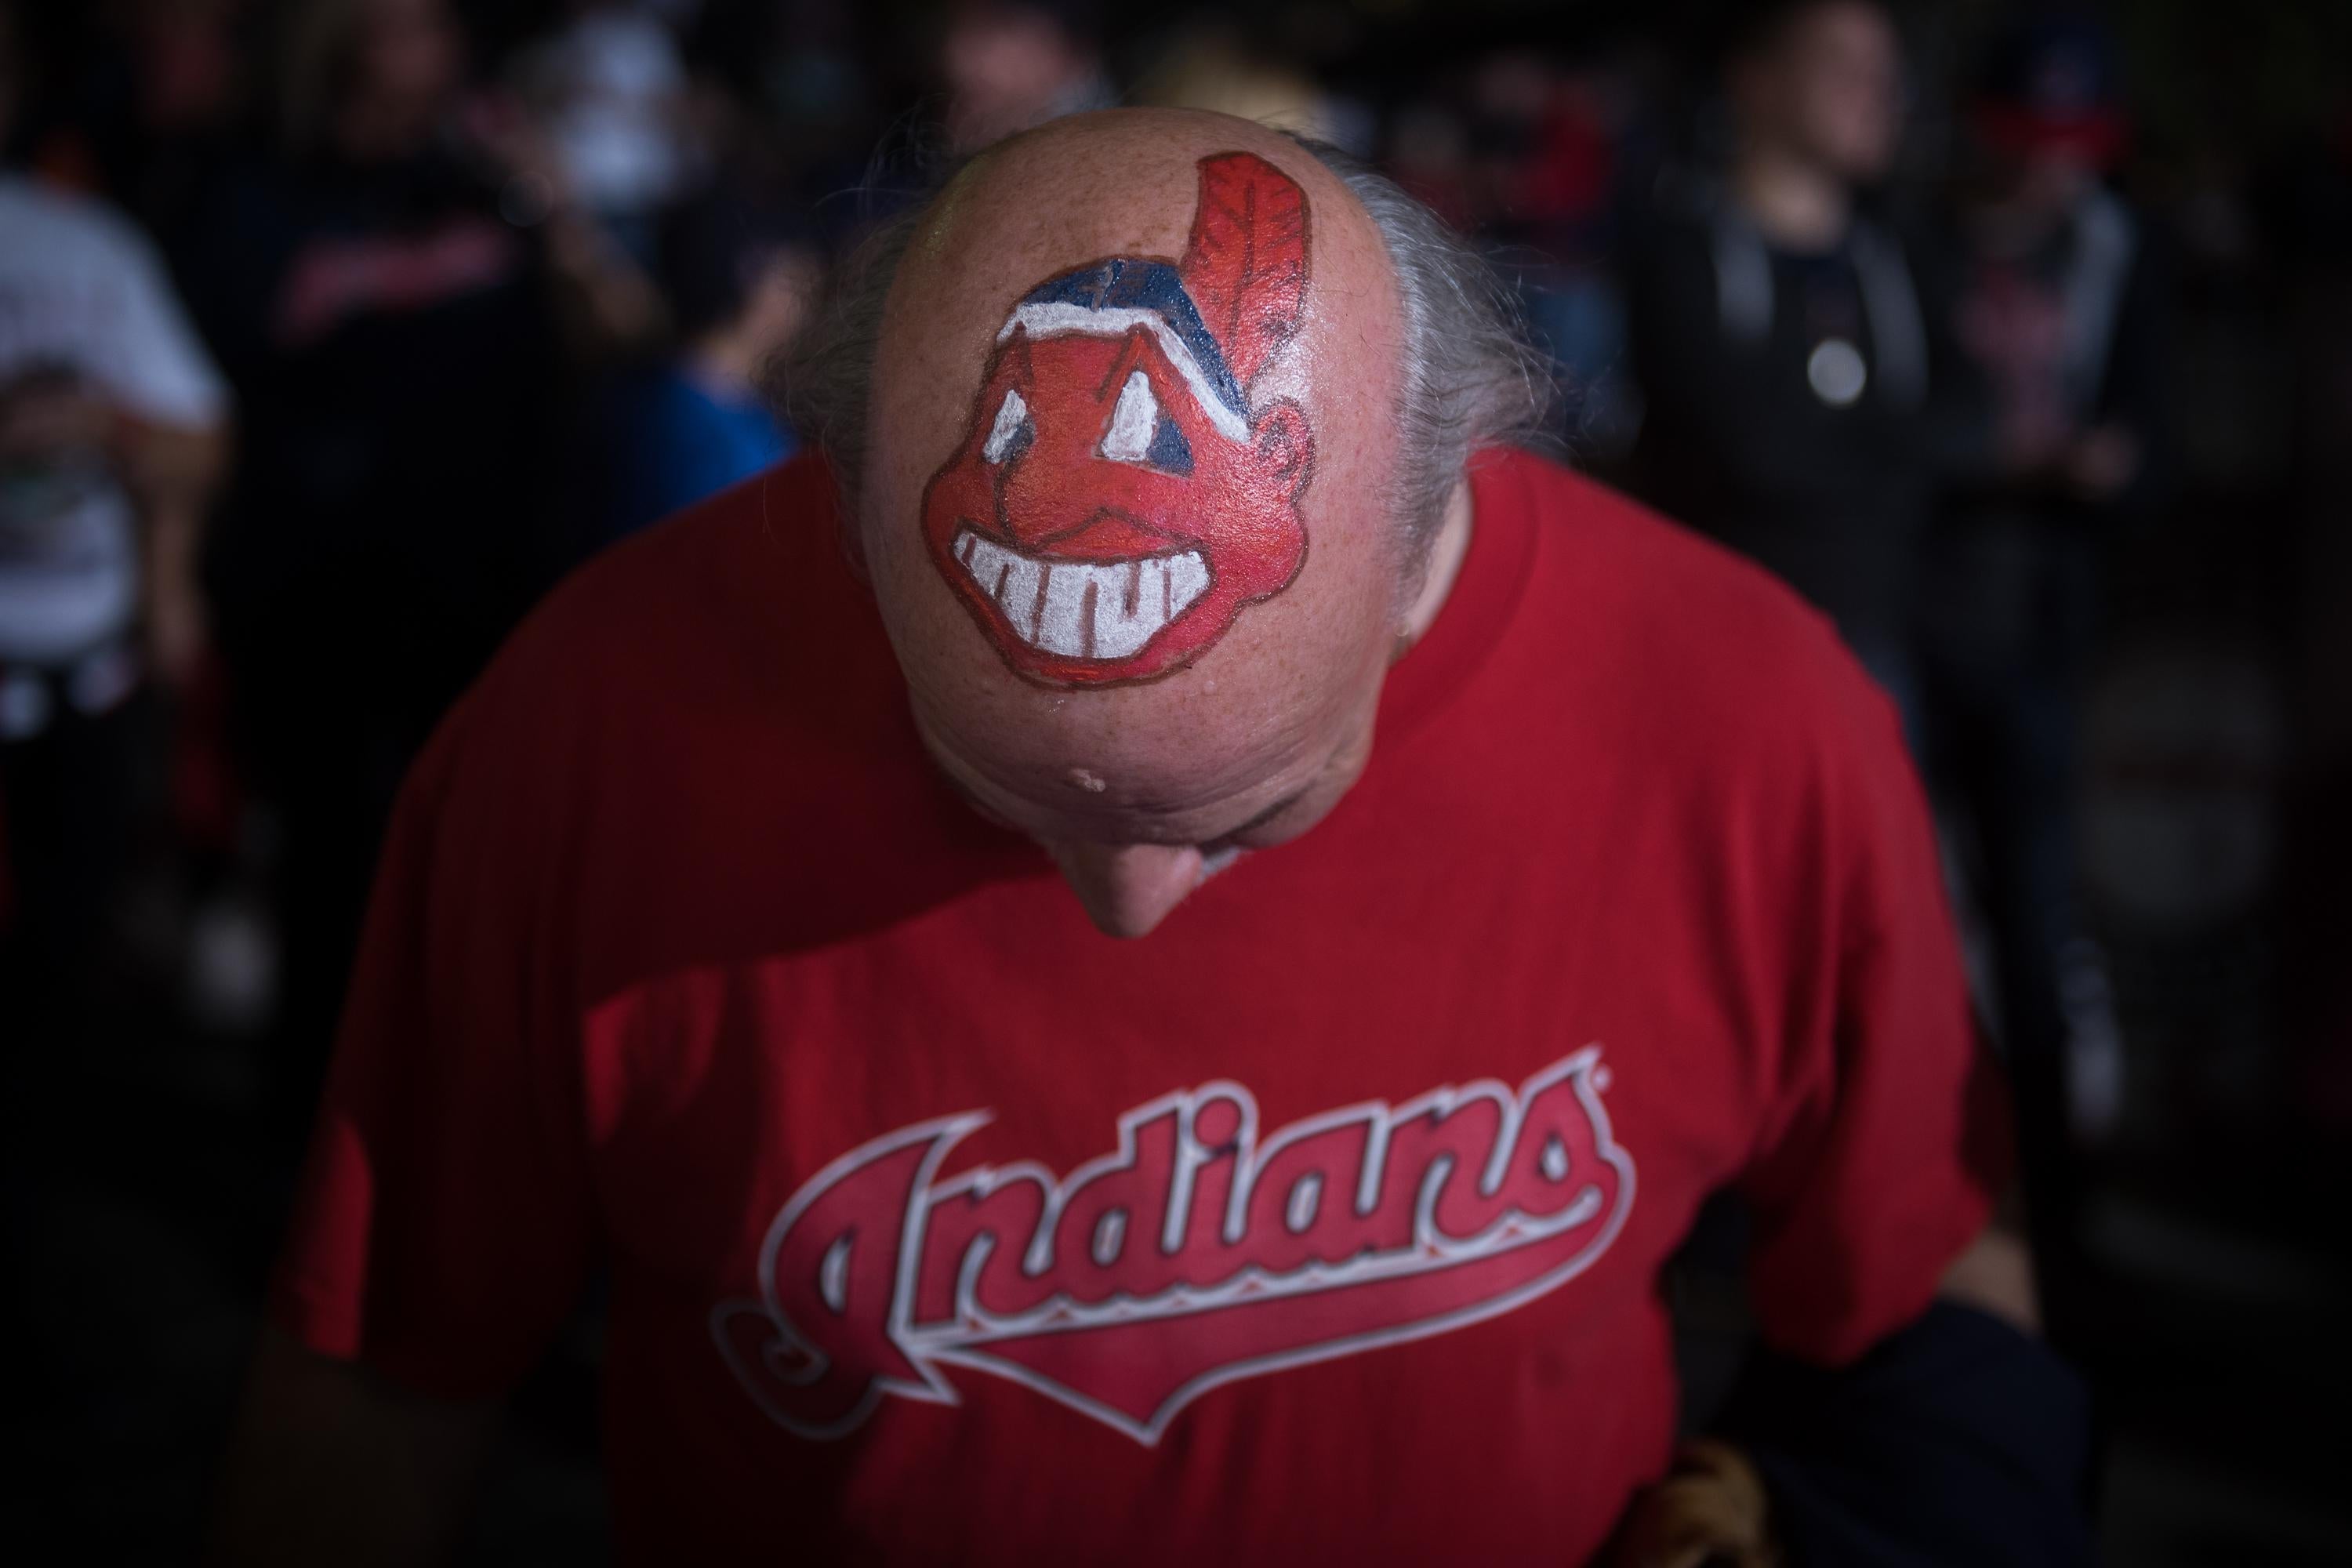 Should the Cleveland Indians change their name? 